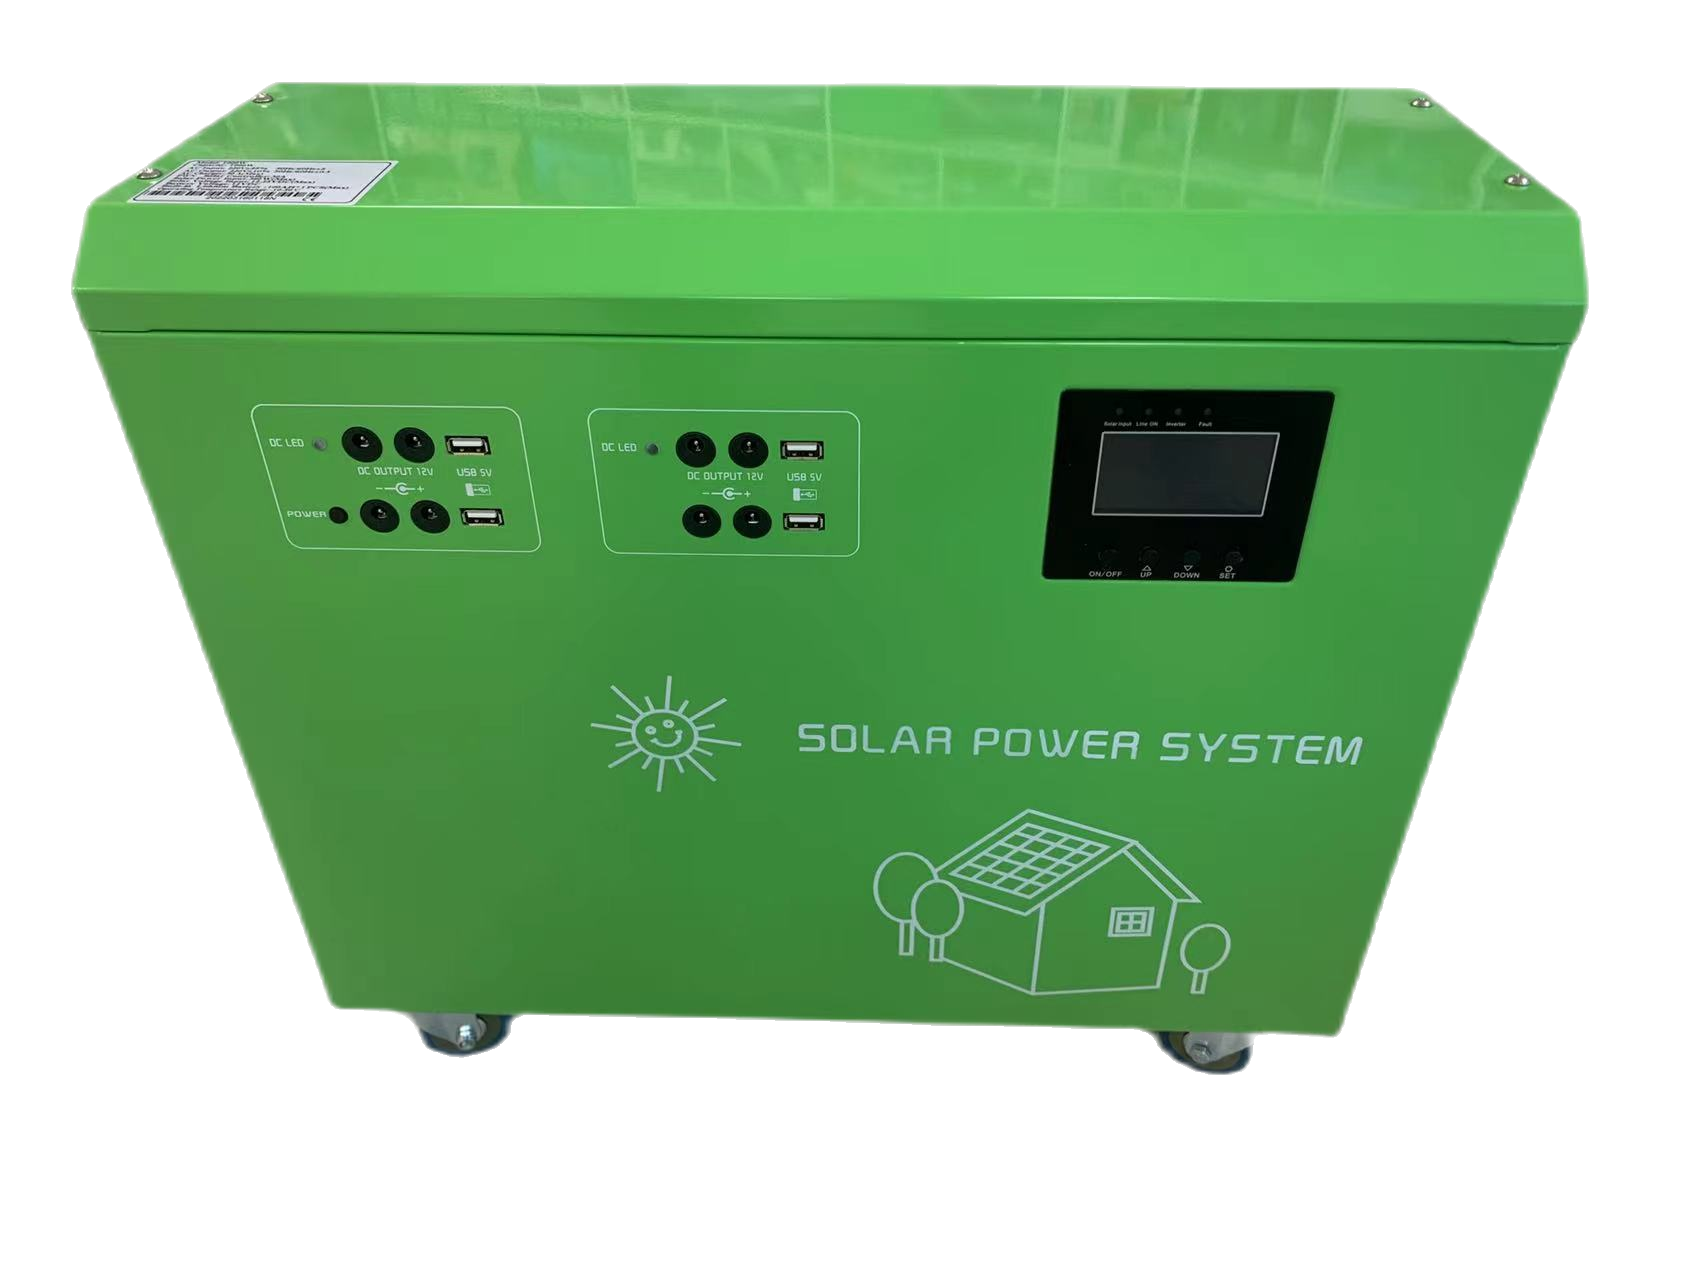 Best Portable Power Station With Solar Panels